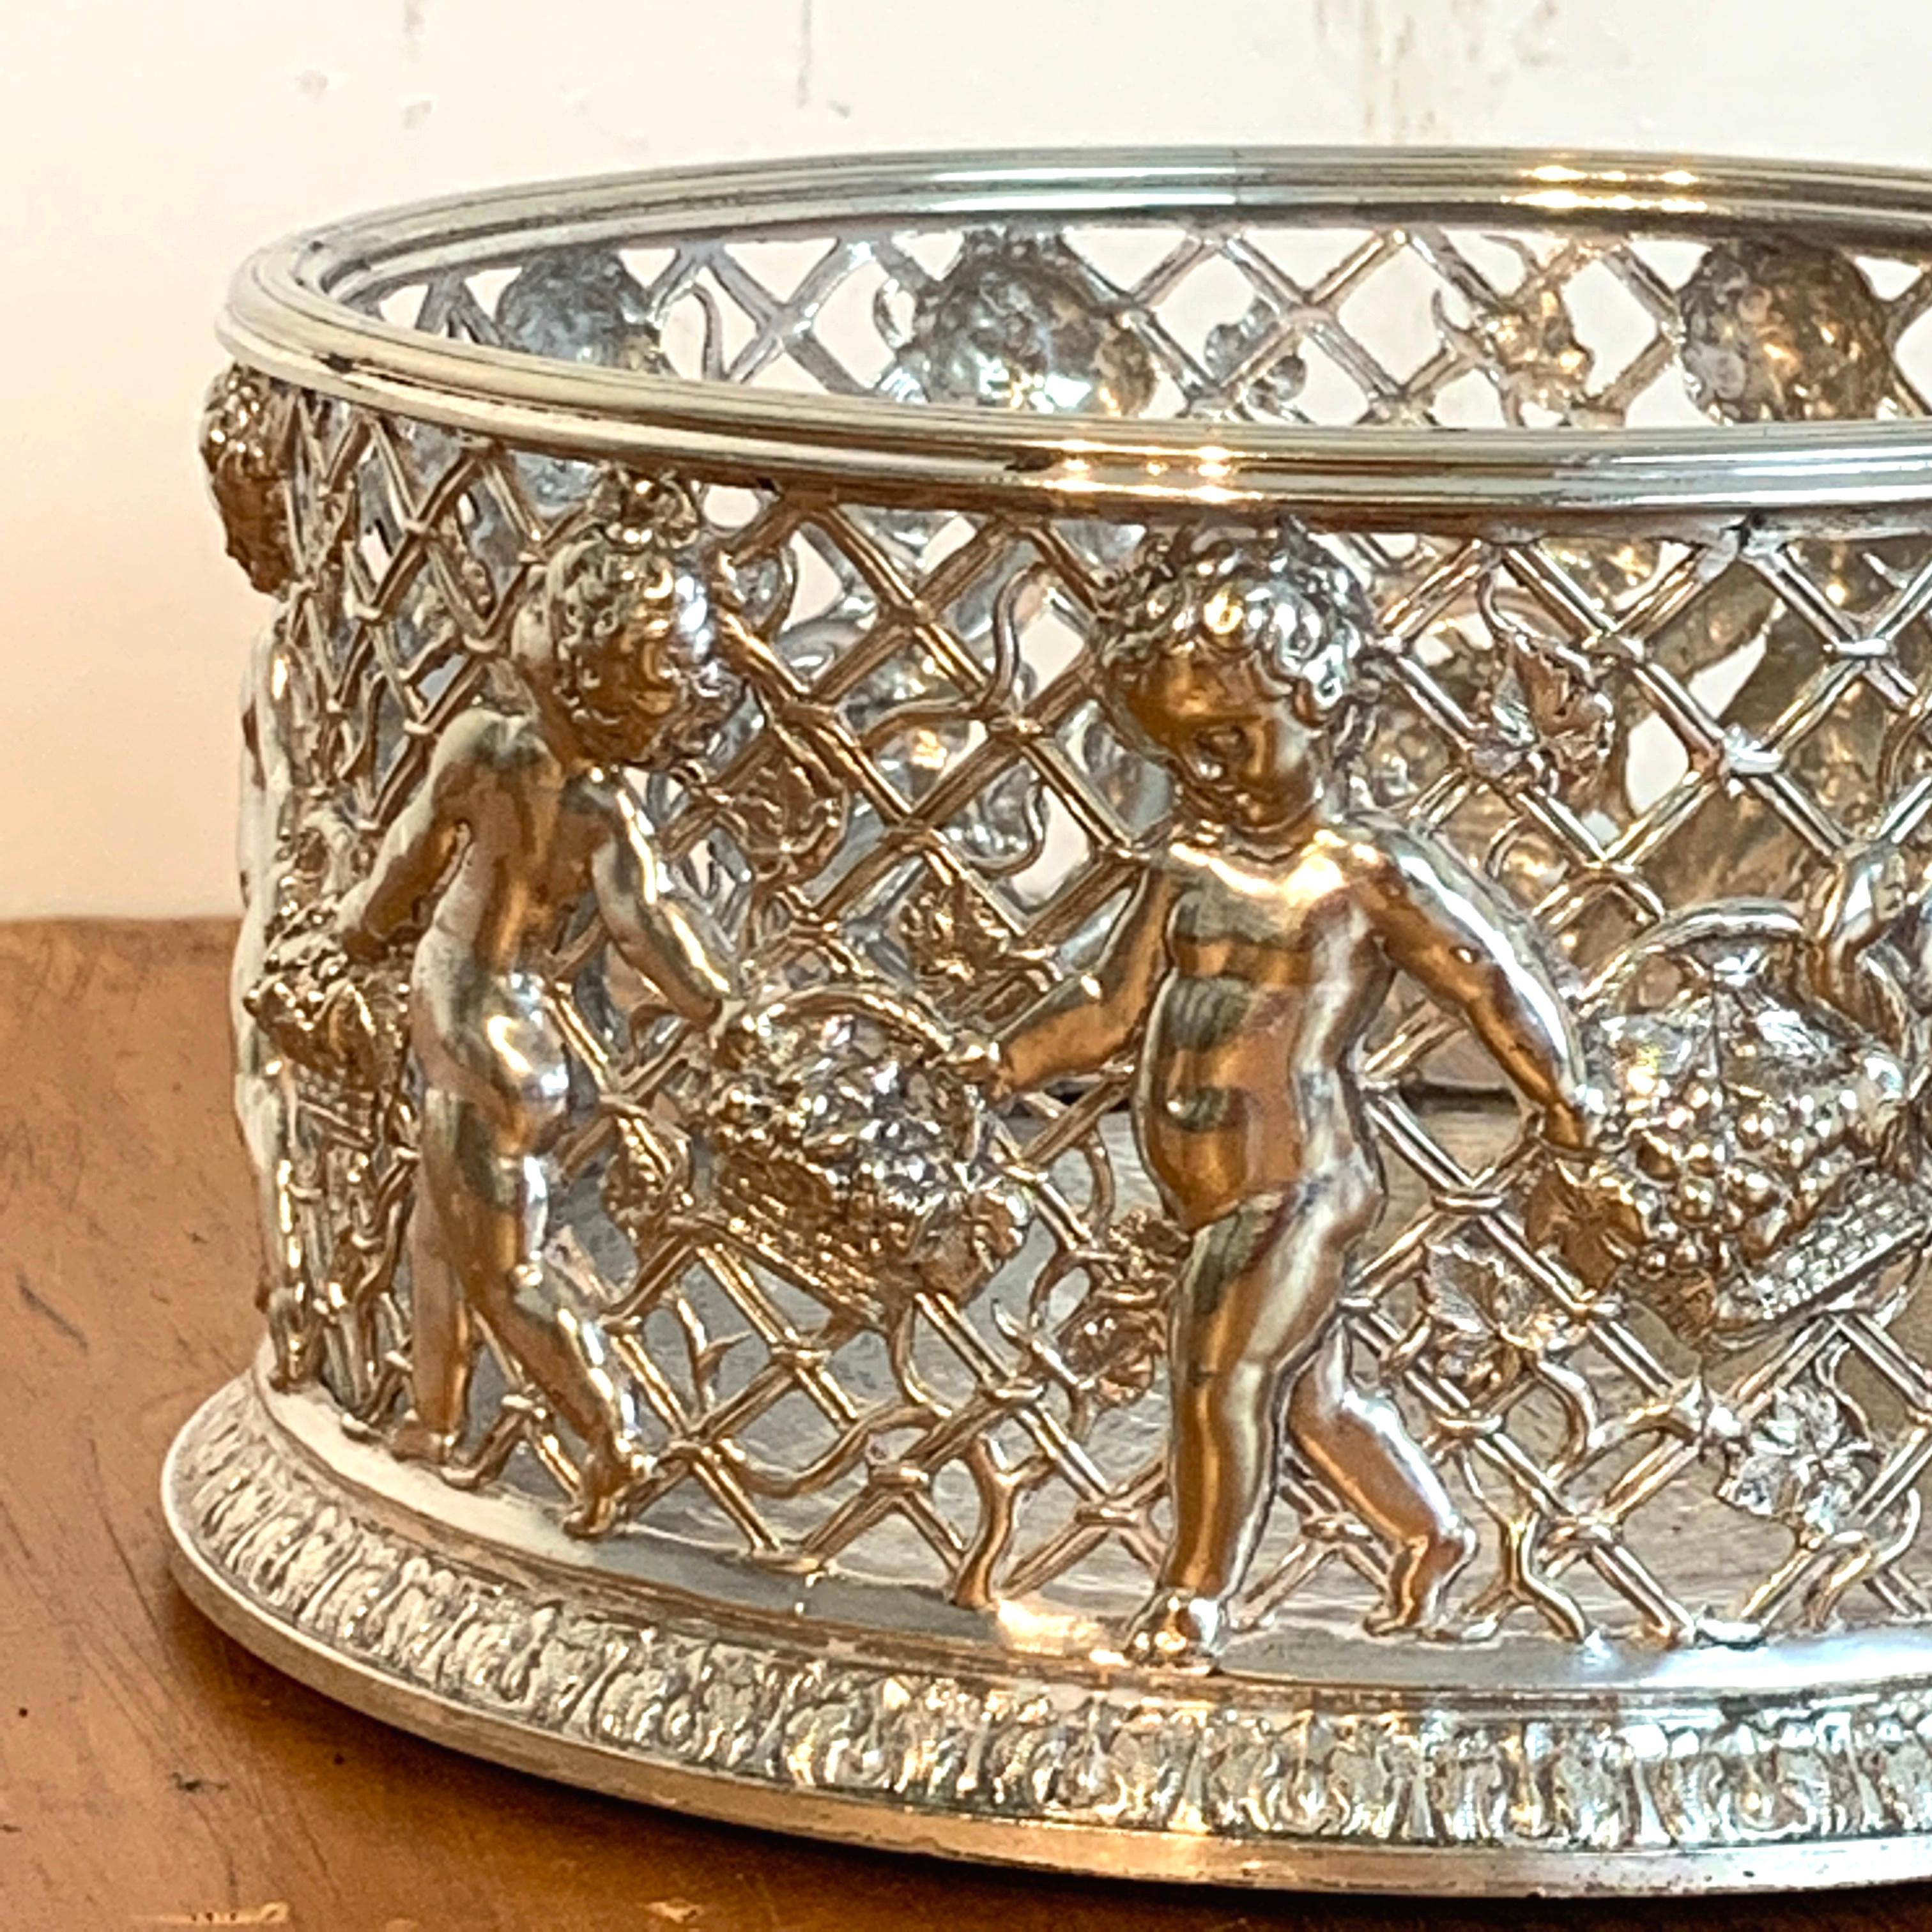 Magnificent English silver plated putti motif large wine coaster, attributed to Elkington. With pierced body with 9 frolicking draped babes with baskets of flowers, engine turned bottom with hardwood underneath. Apparently unmarked.